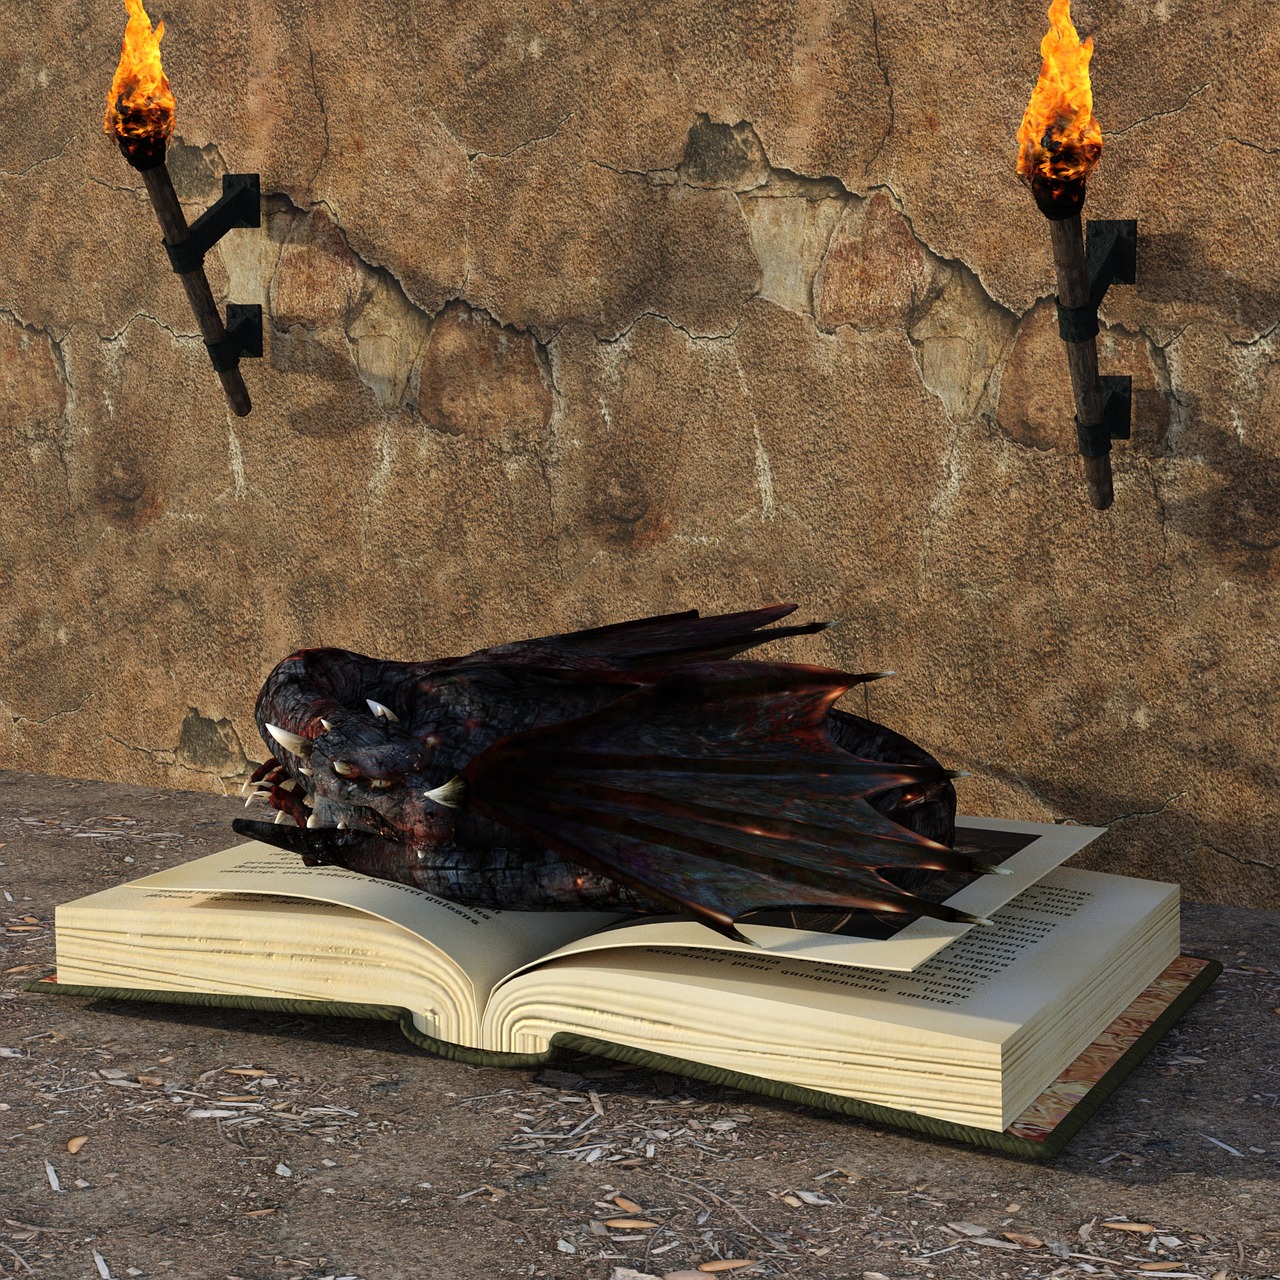 dragons  book  torches free photo